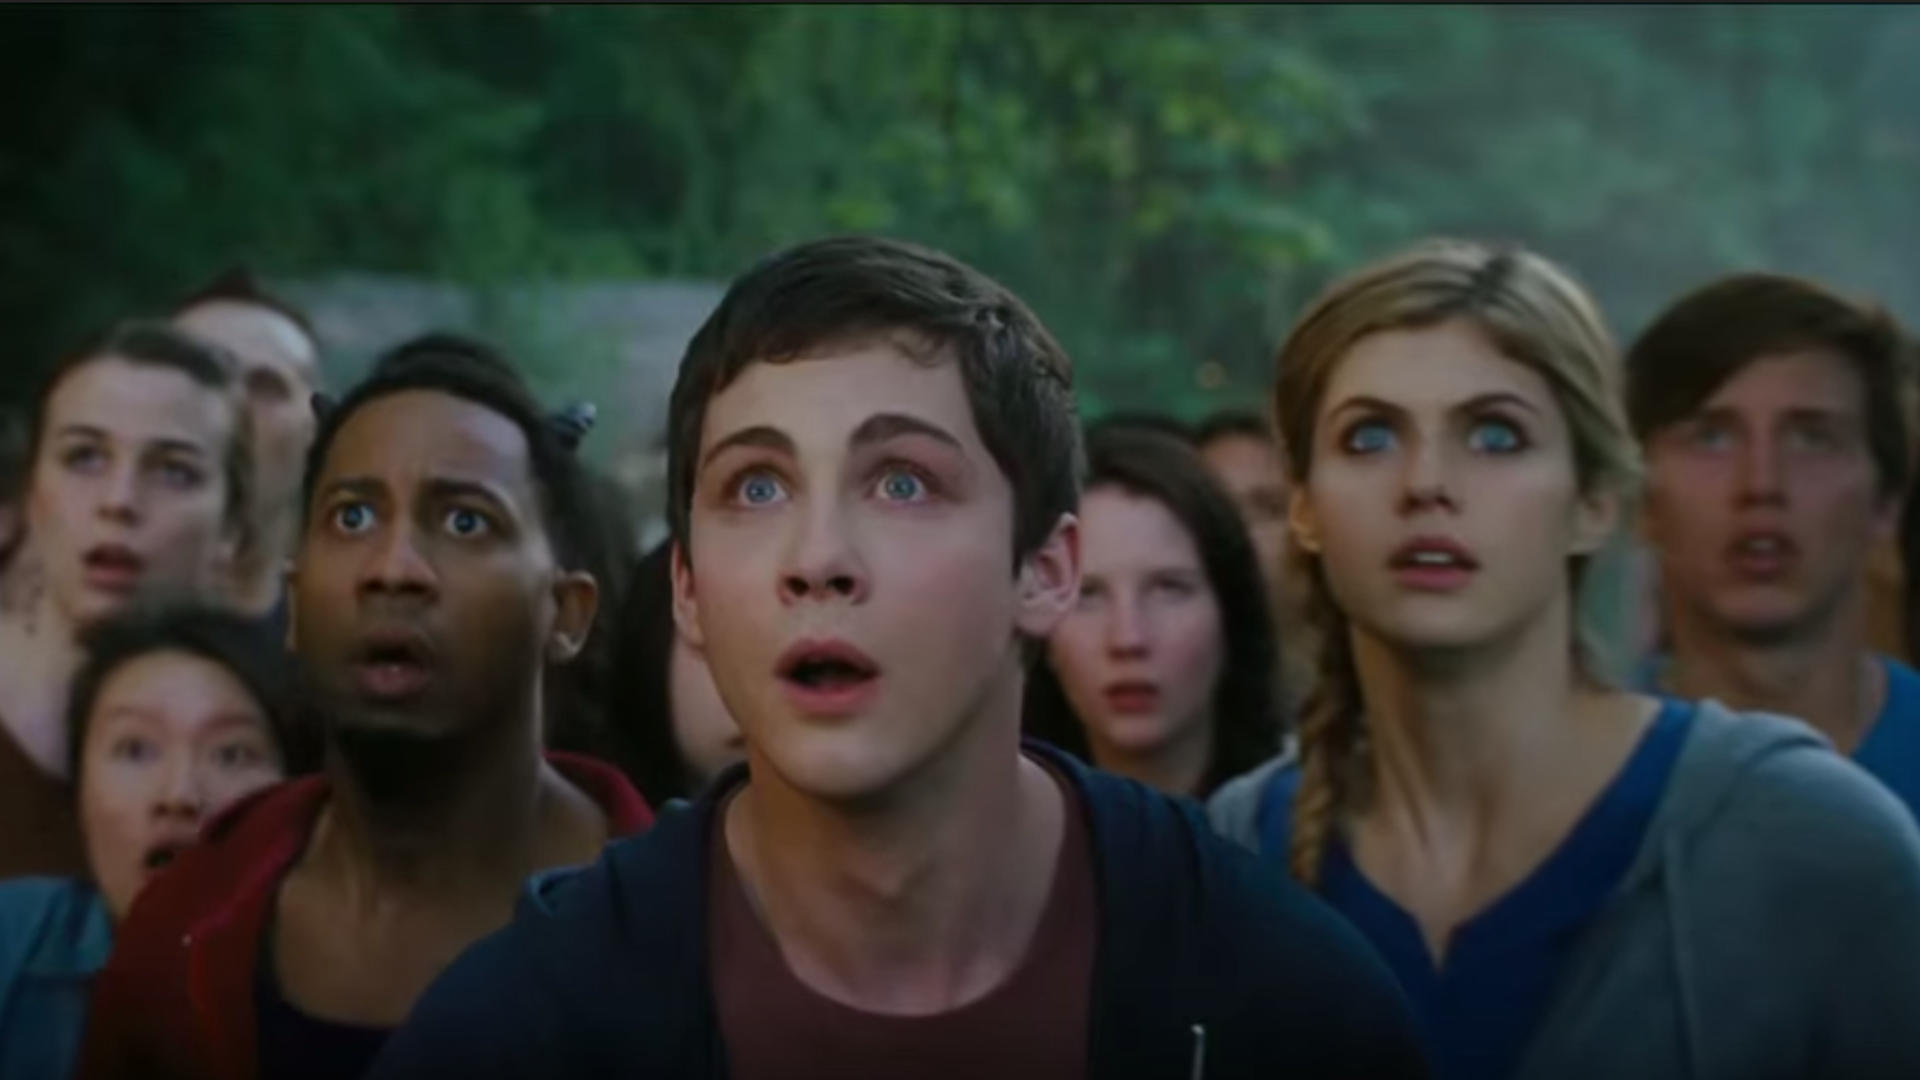 A scene from Percy Jackson: Sea of Monsters